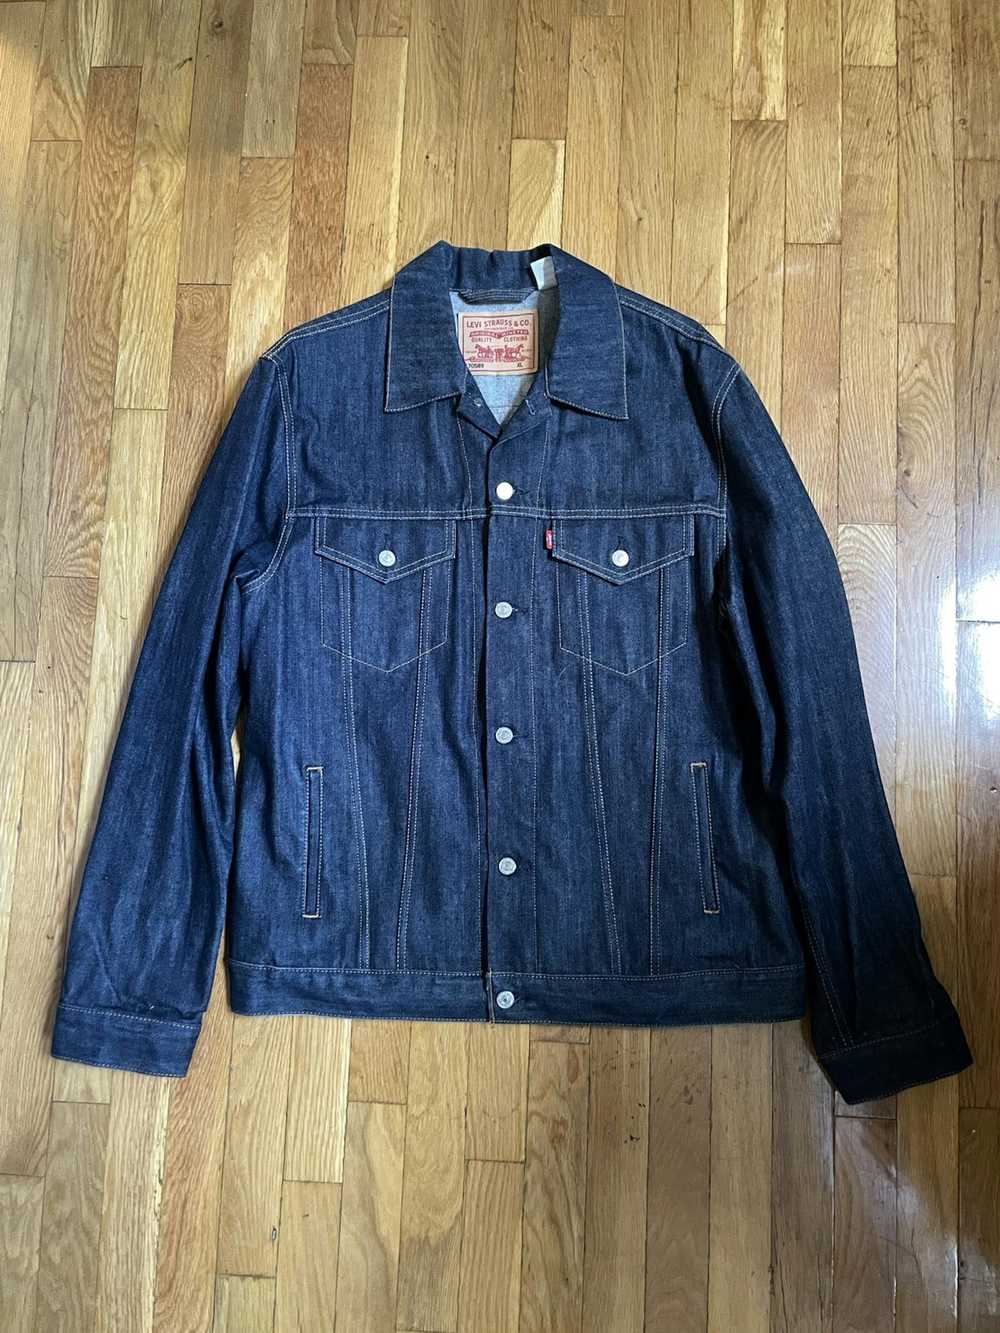 Levi's VERY RARE Andre x Levis Jacket 1/50 - image 2